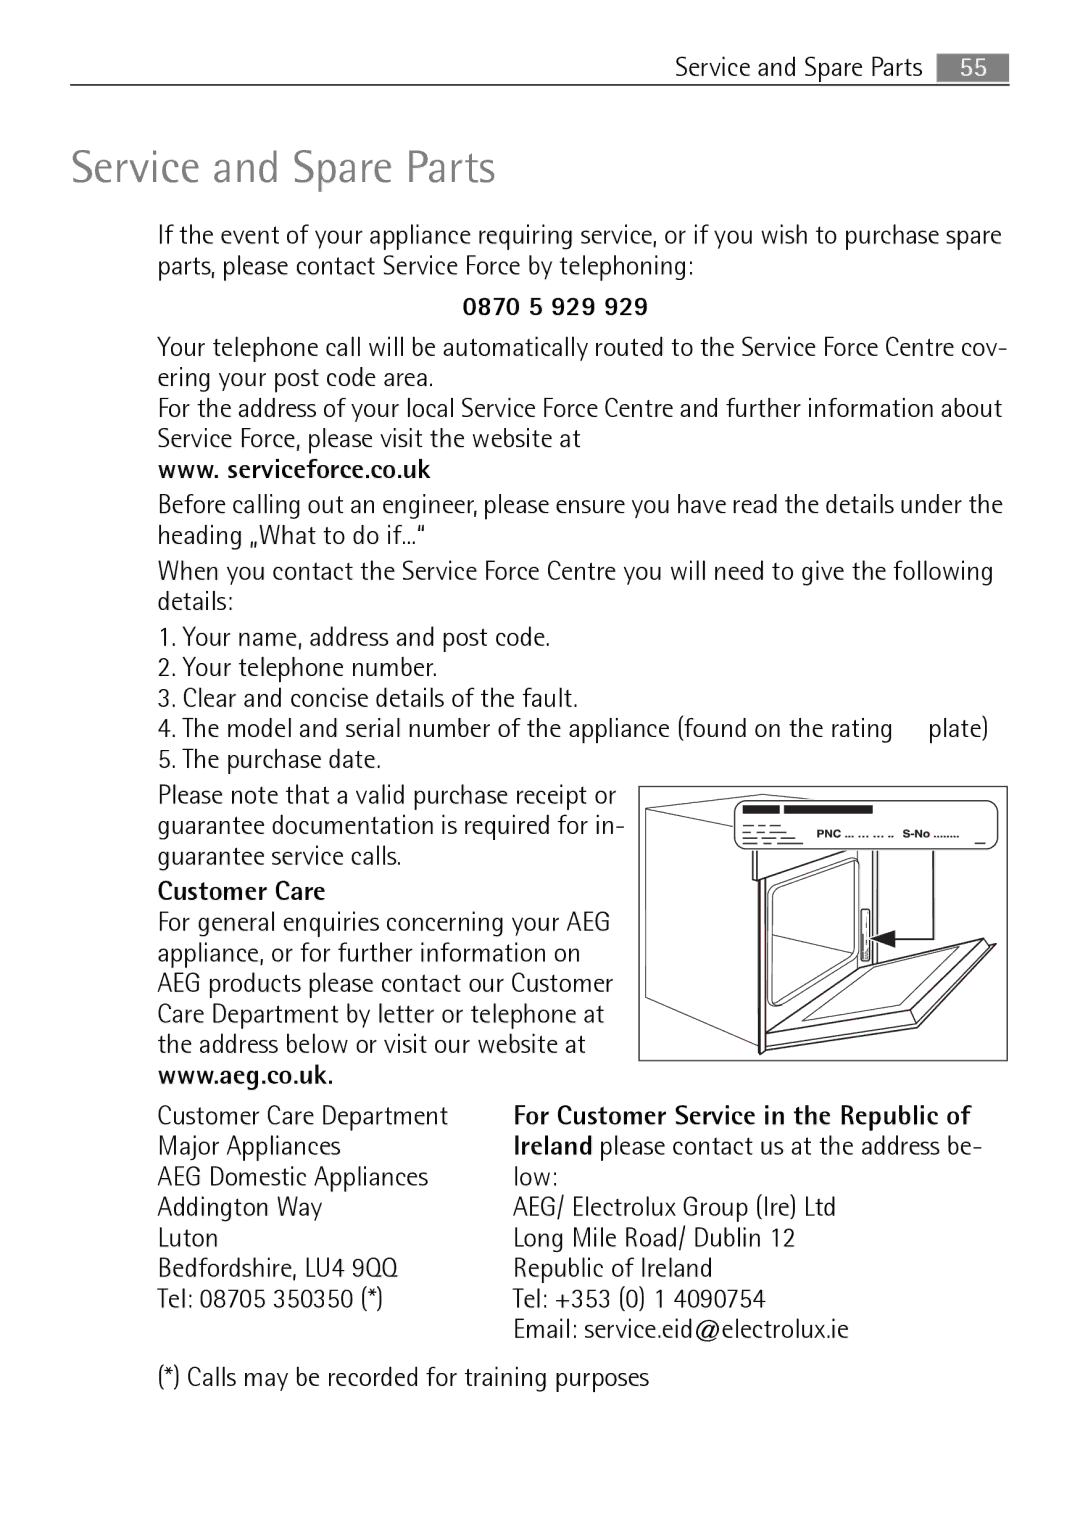 Electrolux B3101-5 user manual 0870 5 929, Customer Care, For Customer Service in the Republic 